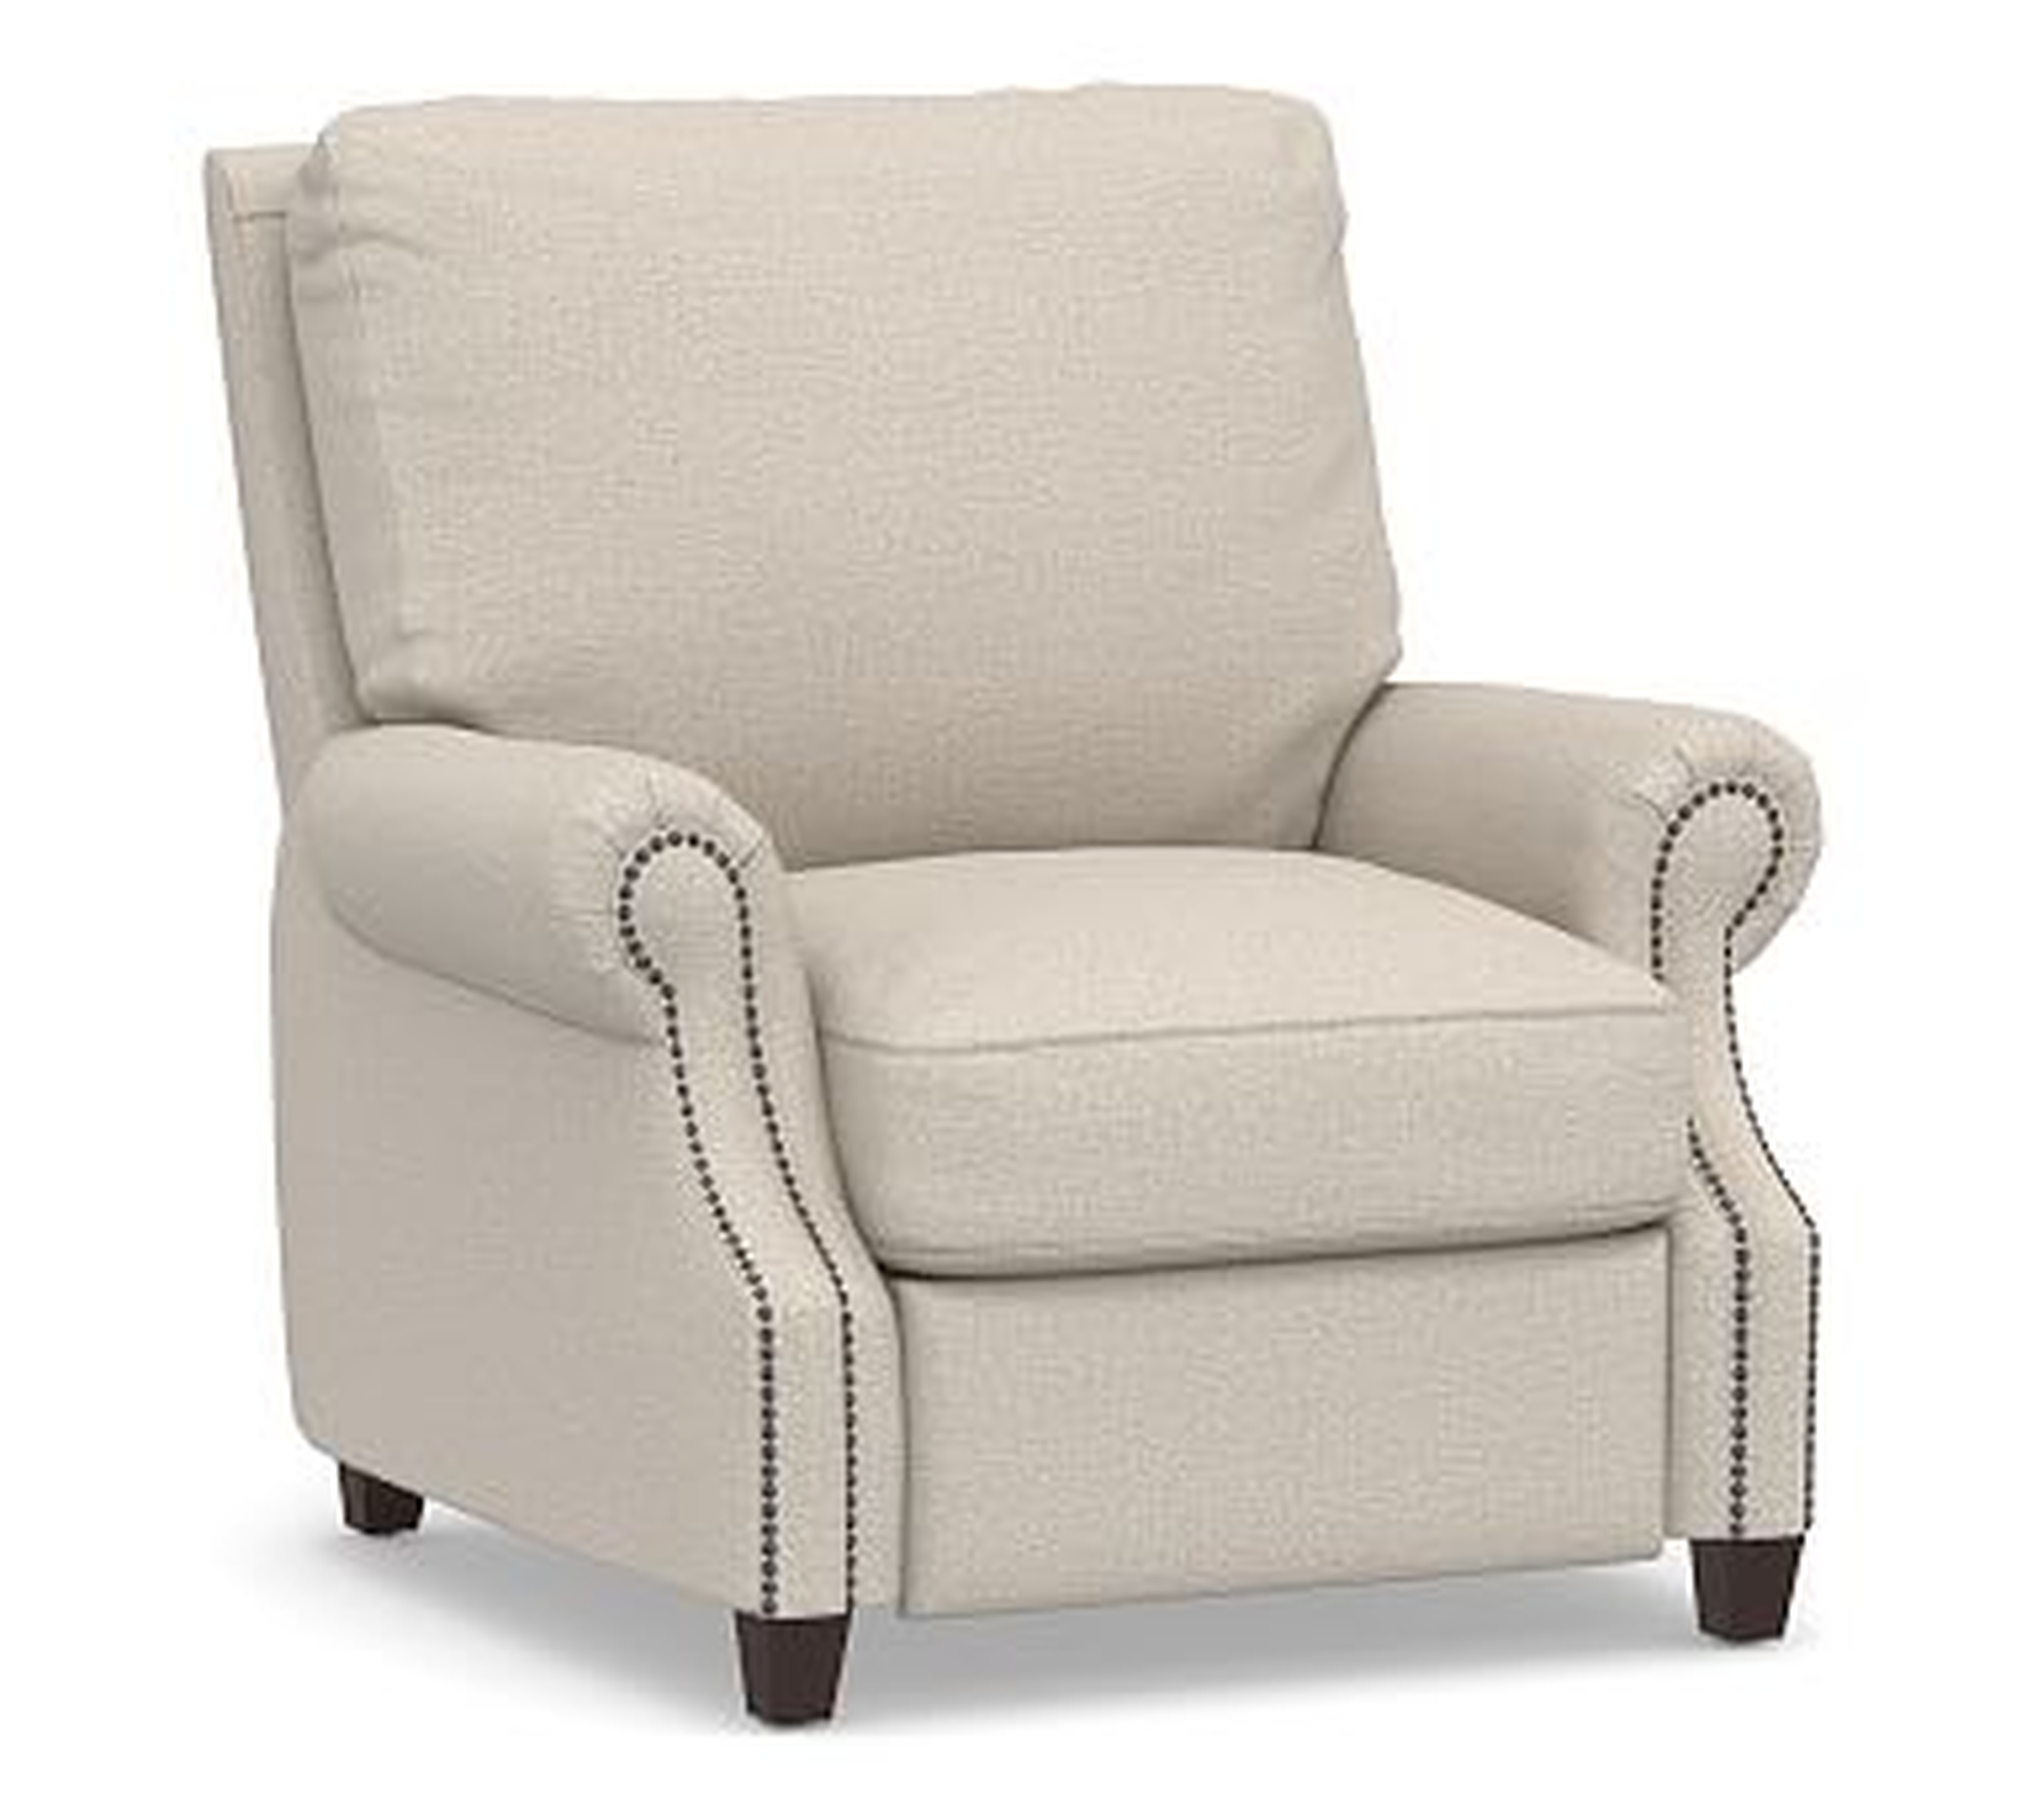 James Upholstered Recliner, Down Blend Wrapped Cushions, Performance Chateau Basketweave Oatmeal - Pottery Barn